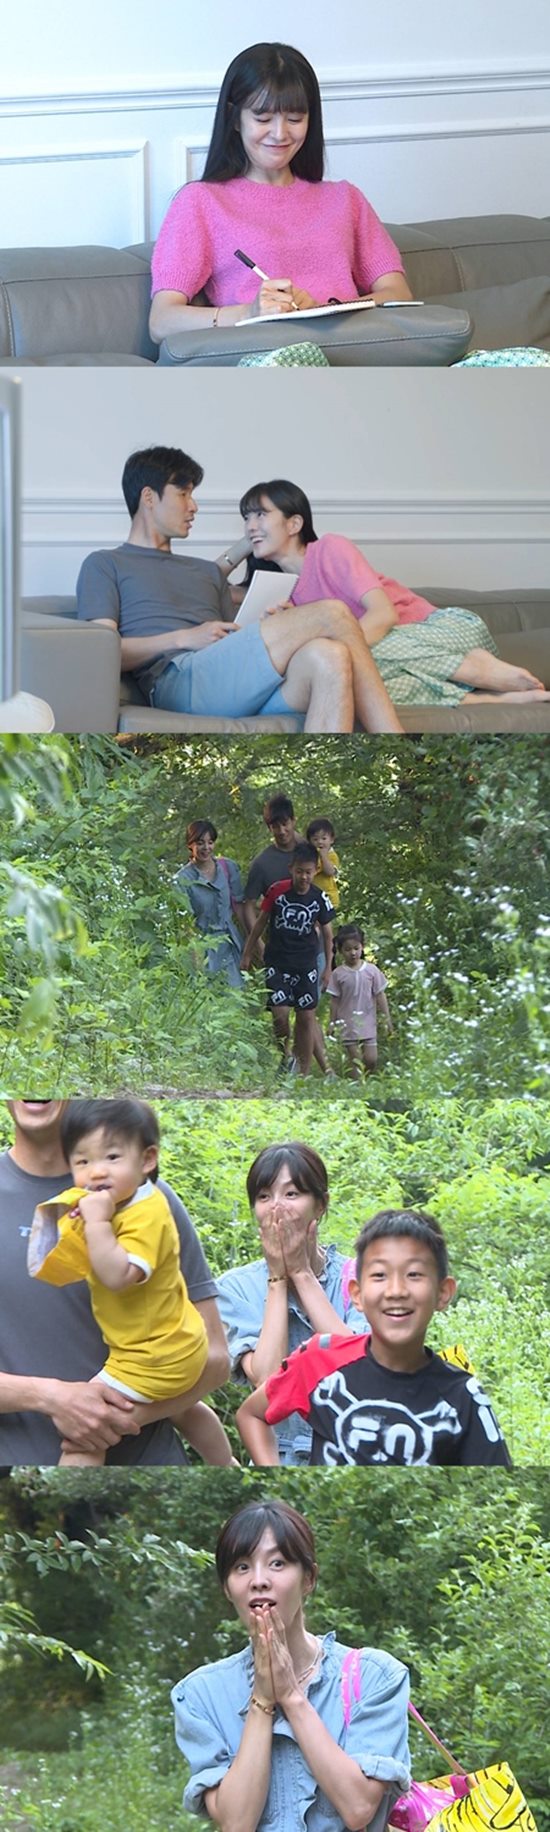 Kim Sungs Rob Reiner will be released on SBS Sangsangmong Season 2 - You Are My Destiny which is broadcasted at 11:10 pm on the 19th.Jung Jo-gook decided to designate Kim Sung DAY for his wife Kim Sung, who suffered from child care for Sam Brother and Sister, and to listen to his wifes Rob Reiner.Kim Sung usually started to write down things that he wanted to share as a couple without concealing a happy smile on Jung Jo-gooks proposal as he is a husband wish.However, Kim Sungs Rob Reiner, who was released, shocked everyone.Jung Jo-gook, who has a small expression of affection, was full of contents that were embarrassingly shrivelled. It is the back door that even MC Seo Jang-hoon, who watched it, was surprised that he was tired.Indeed, Kim Sungs 10 Rob Reiner is curious about what it will be.Jung Jo-gook, who resigned within a few minutes, executed Rob Reiner for Kim Sung, and Kim Sung was a semi-forced love of Jung Jo-gook (?I was impressed and satisfied with the fact that Jung Jo-gook eventually faced the limit because Kim Sung does this on his feet, which he even considered complex.Kim Sung asked Jung Jo-gook, who hesitated, If you love me, please do it. Jung Jo-gook is said to have turned the studio over with a look that it is hard to bear.Meanwhile Jung Jo-gook moved outdoors with the whole family to make Kim Sungs final Rob Reiner.Kim Sung, who arrived at the place prepared by Jung Jo-gook, and Sam Brother and Sister were surprised by the super-sized this, which is 80m long.The first Taeha and the second Yoonha were born and rushed to the first sight.What is the identity of this in the mountains, Kim Sung can be seen in Same Bed, Different Dreams 2: You Are My Dest, which is broadcasted at 11:10 pm on the 19th.Photo = SBS